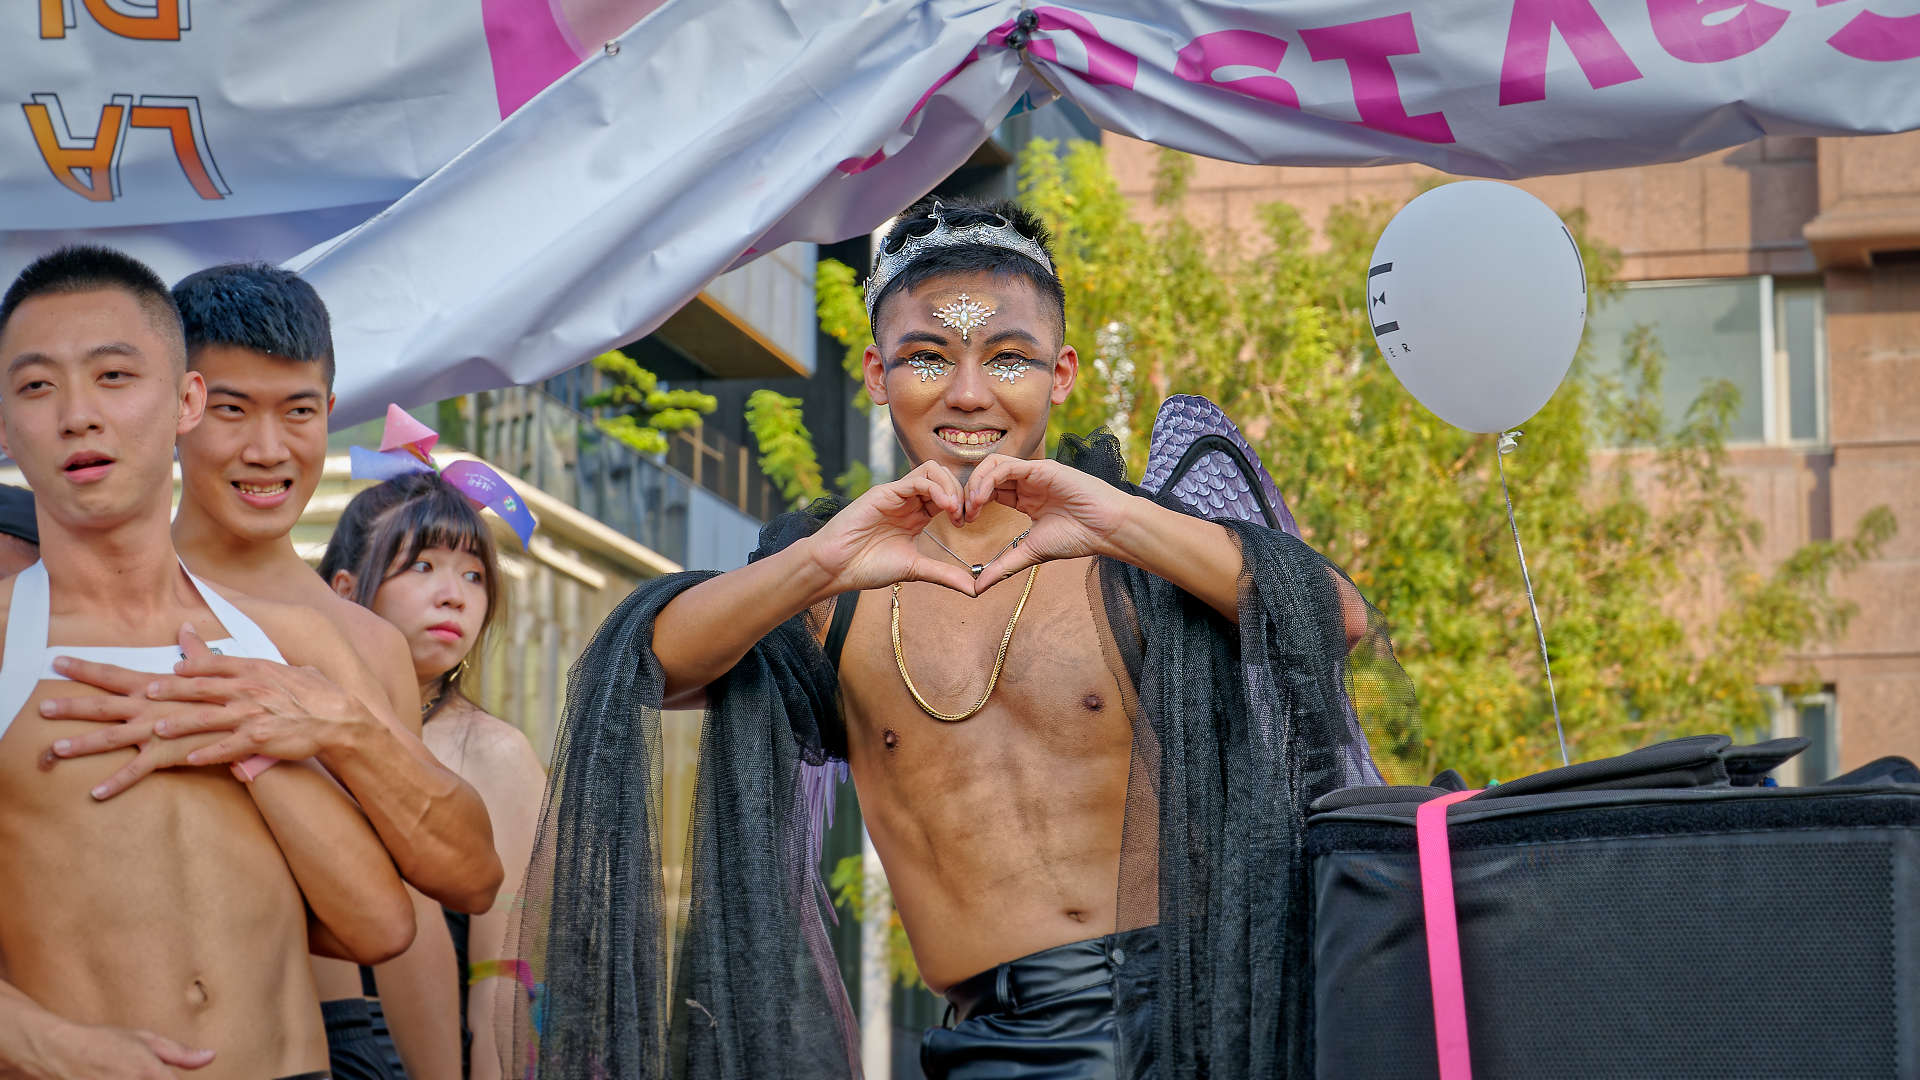 Shirtless dancer looking at the camera and making a heart-shape with his hands.